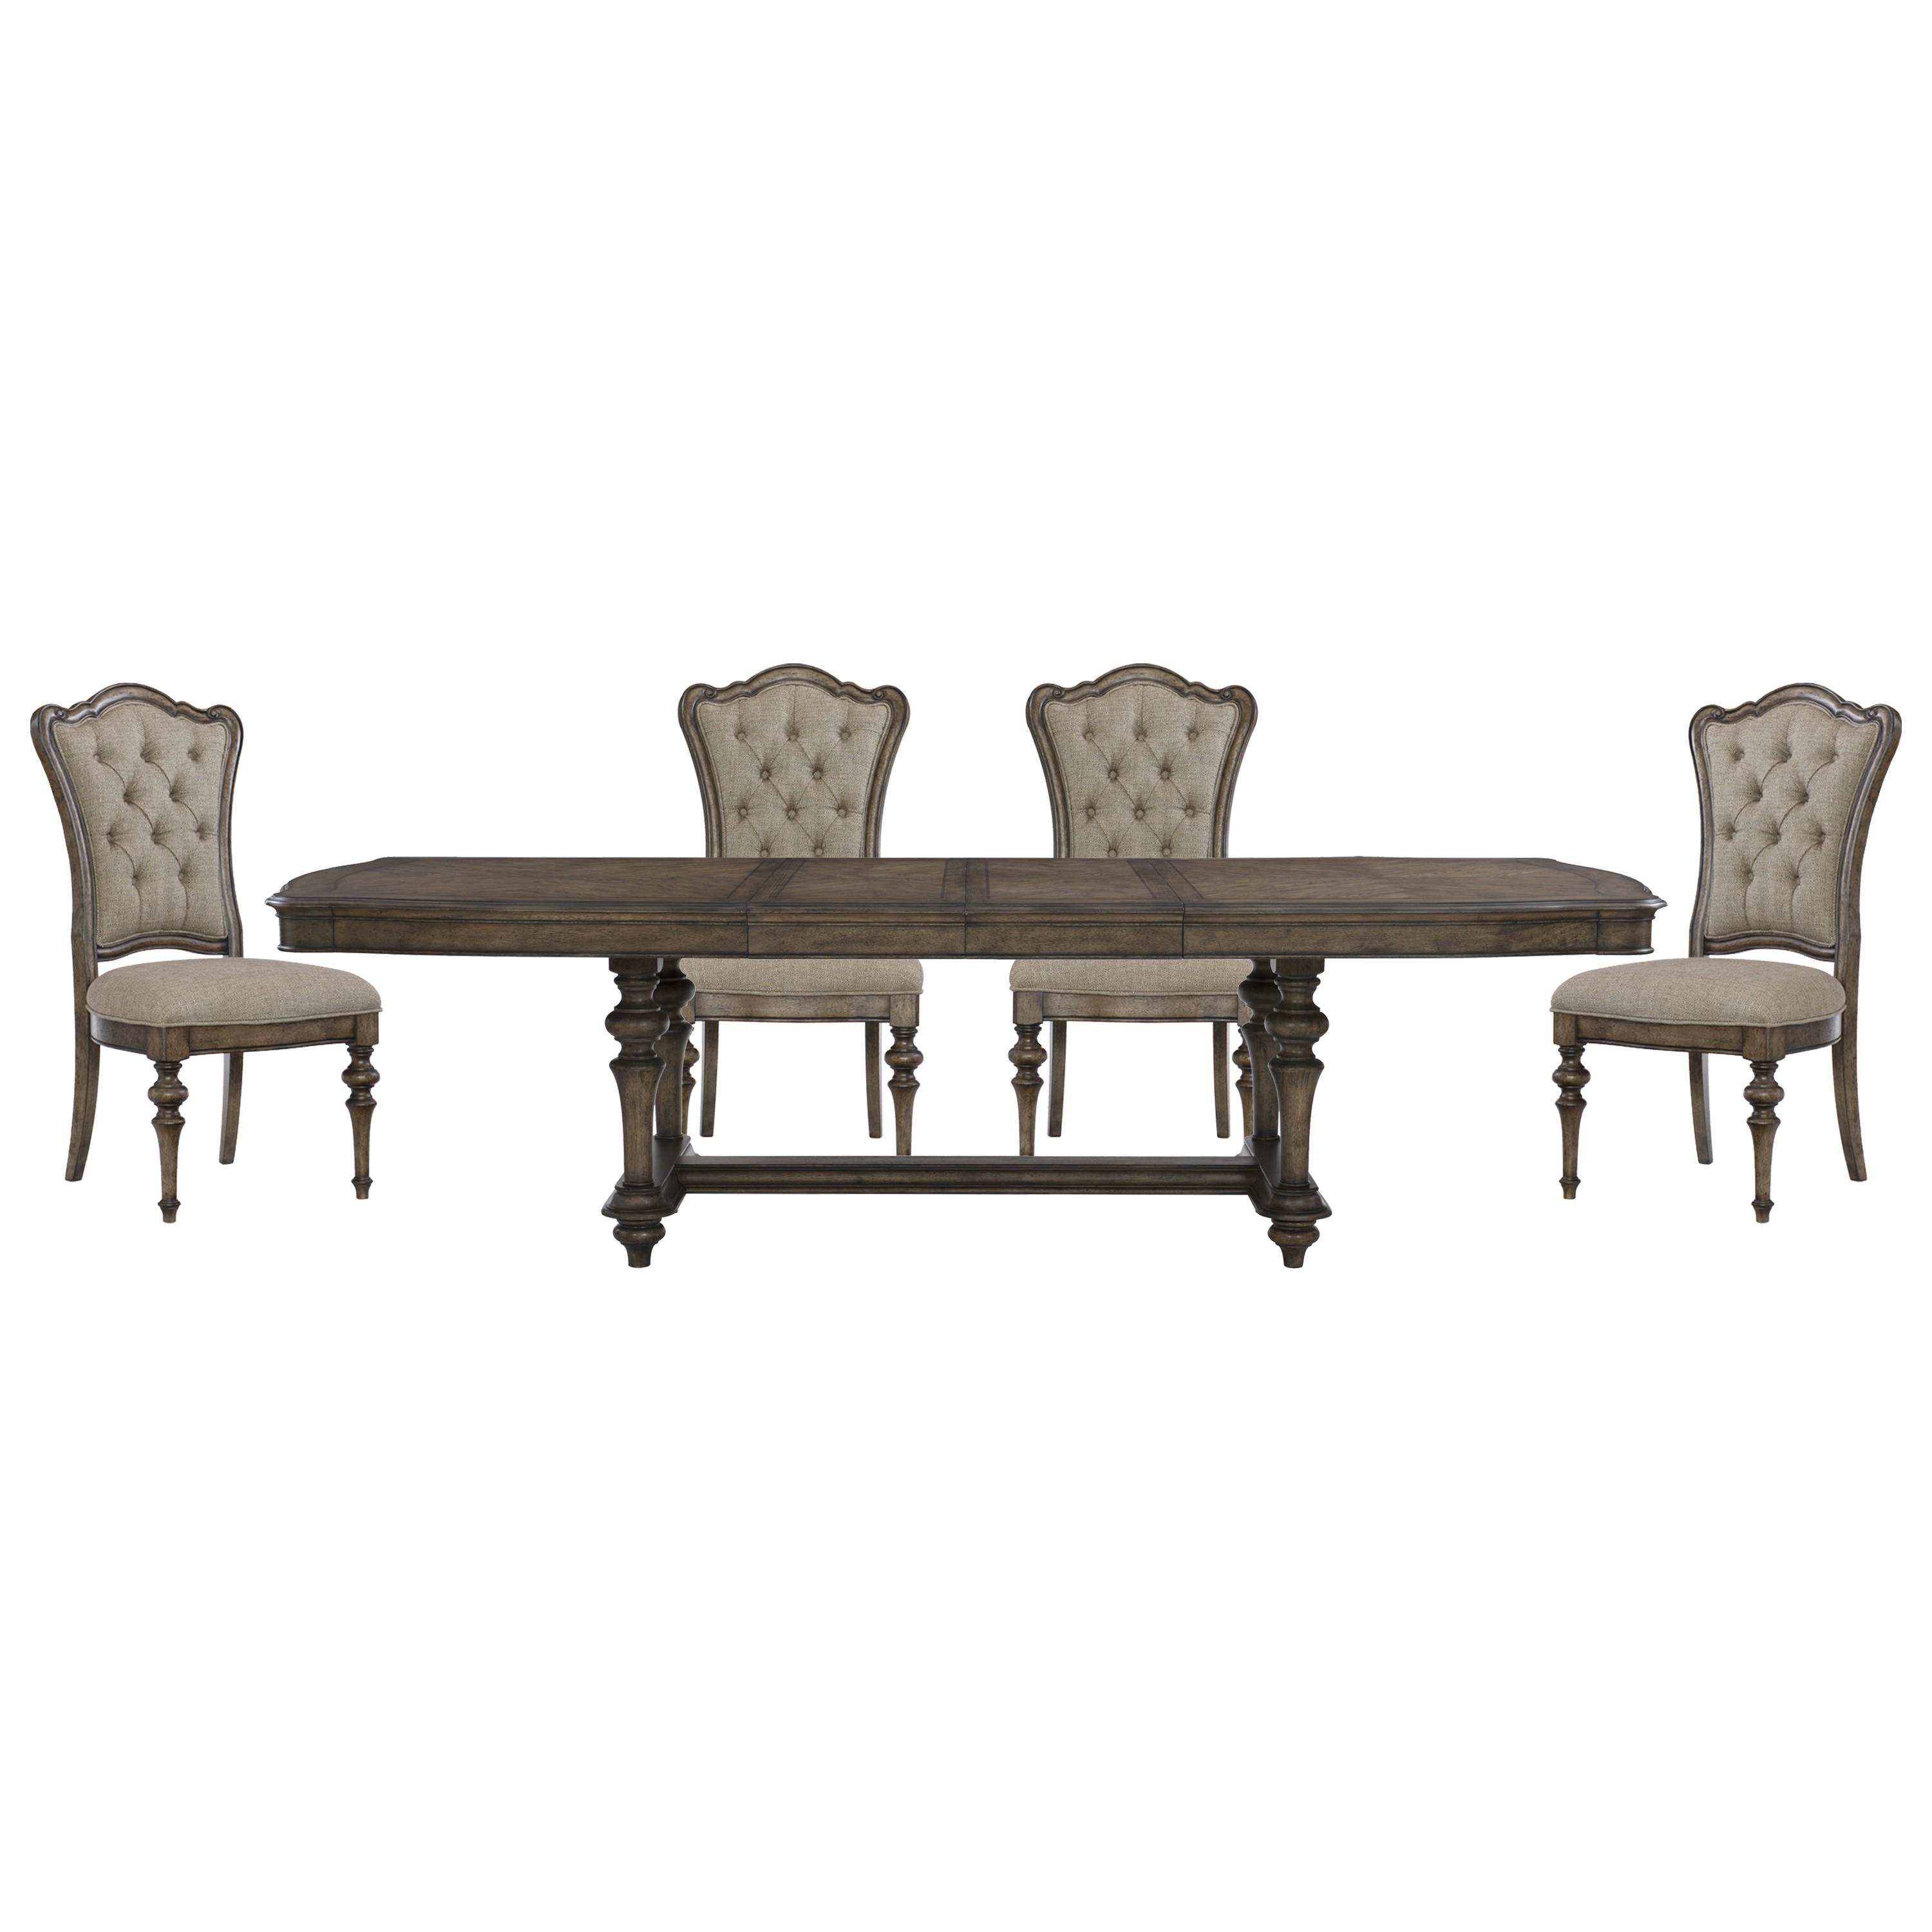 Traditional Dining Room Set 1682-108*5PC Heath Court 1682-108*5PC in Brown Oak Polyester